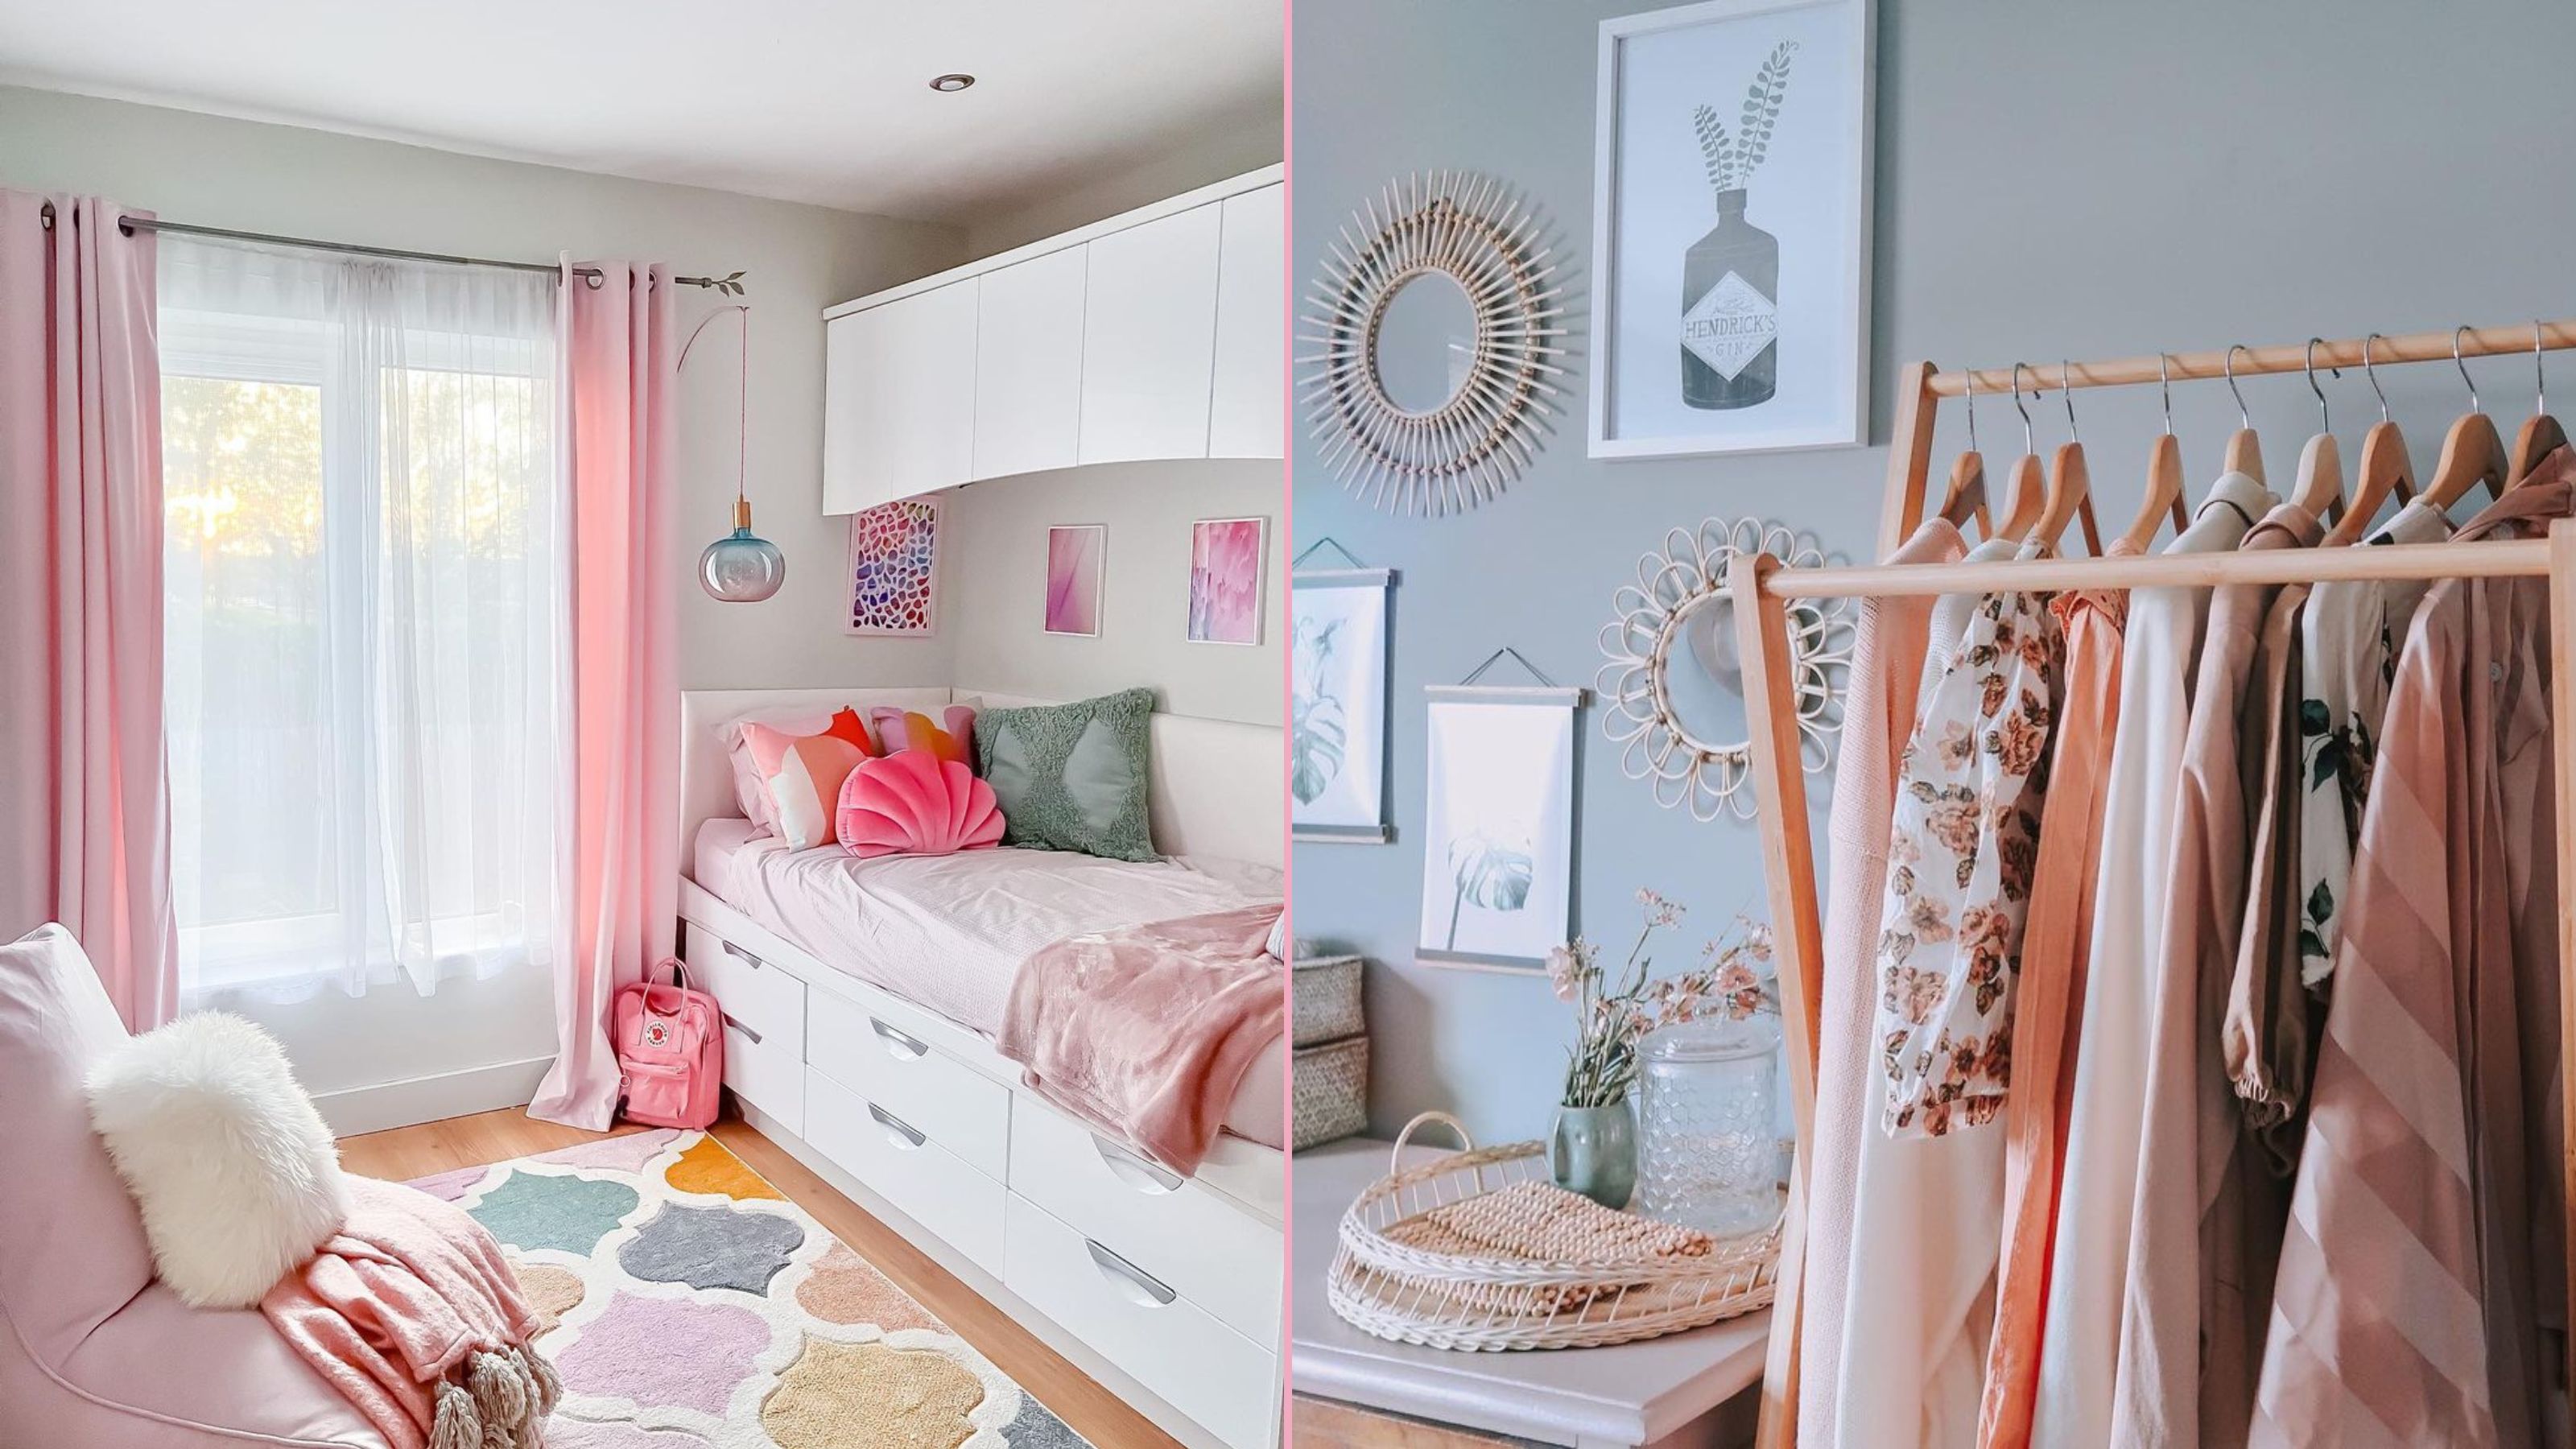 10  Finds That Will Organize Your Small Bedroom - Organization  Obsessed